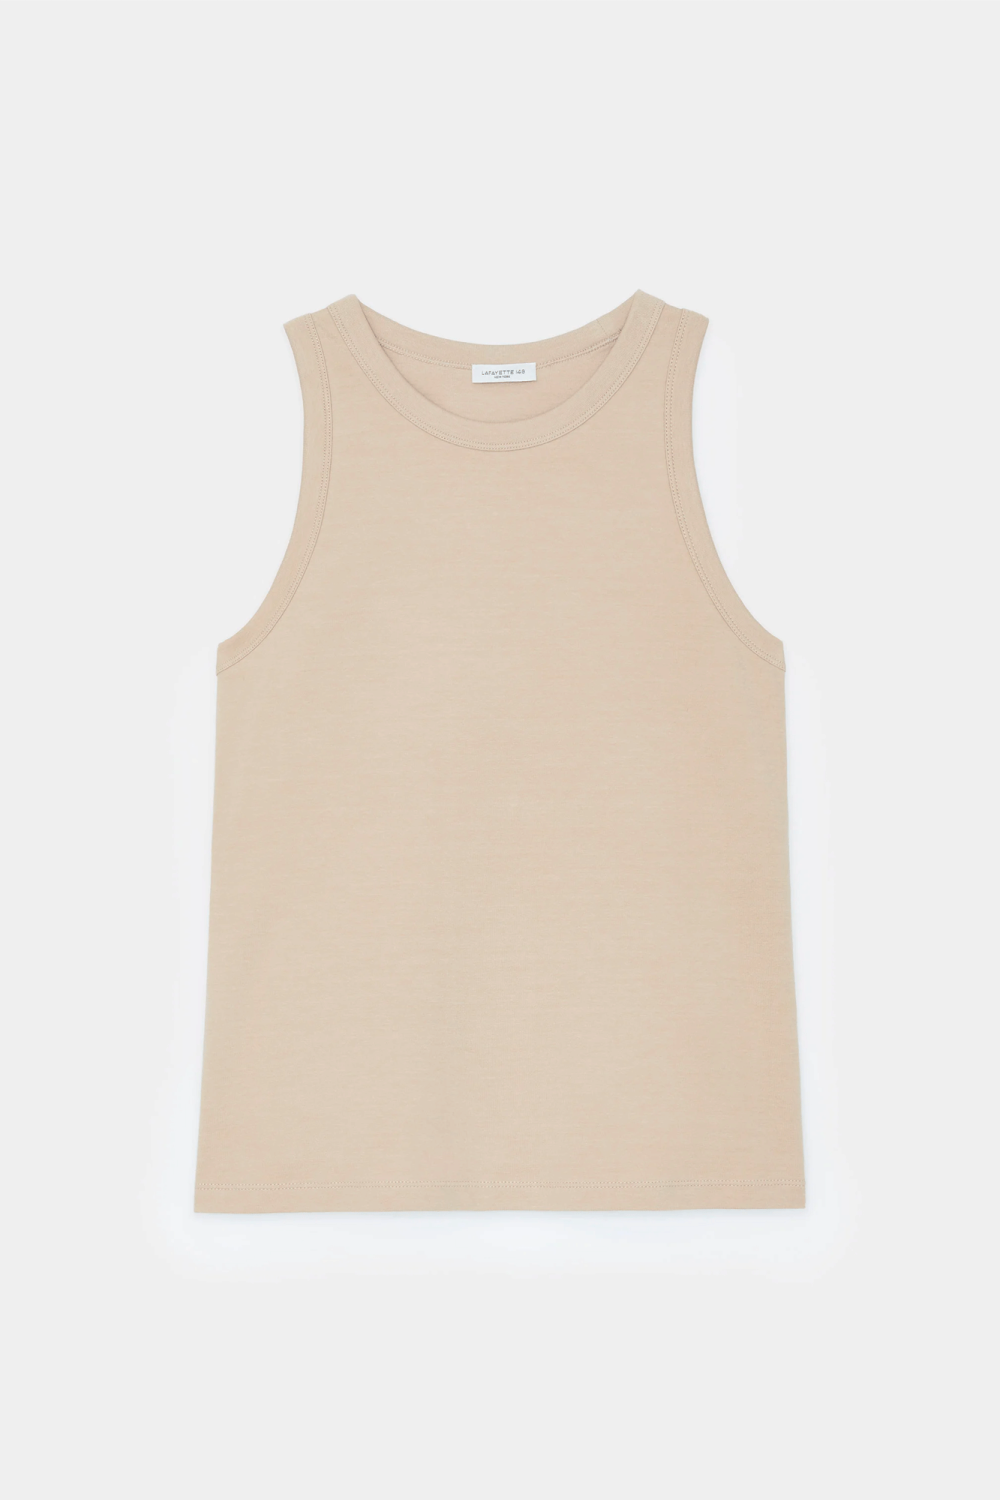 Stay comfortable and stylish with Lafayette 148 Racerback Tank. 